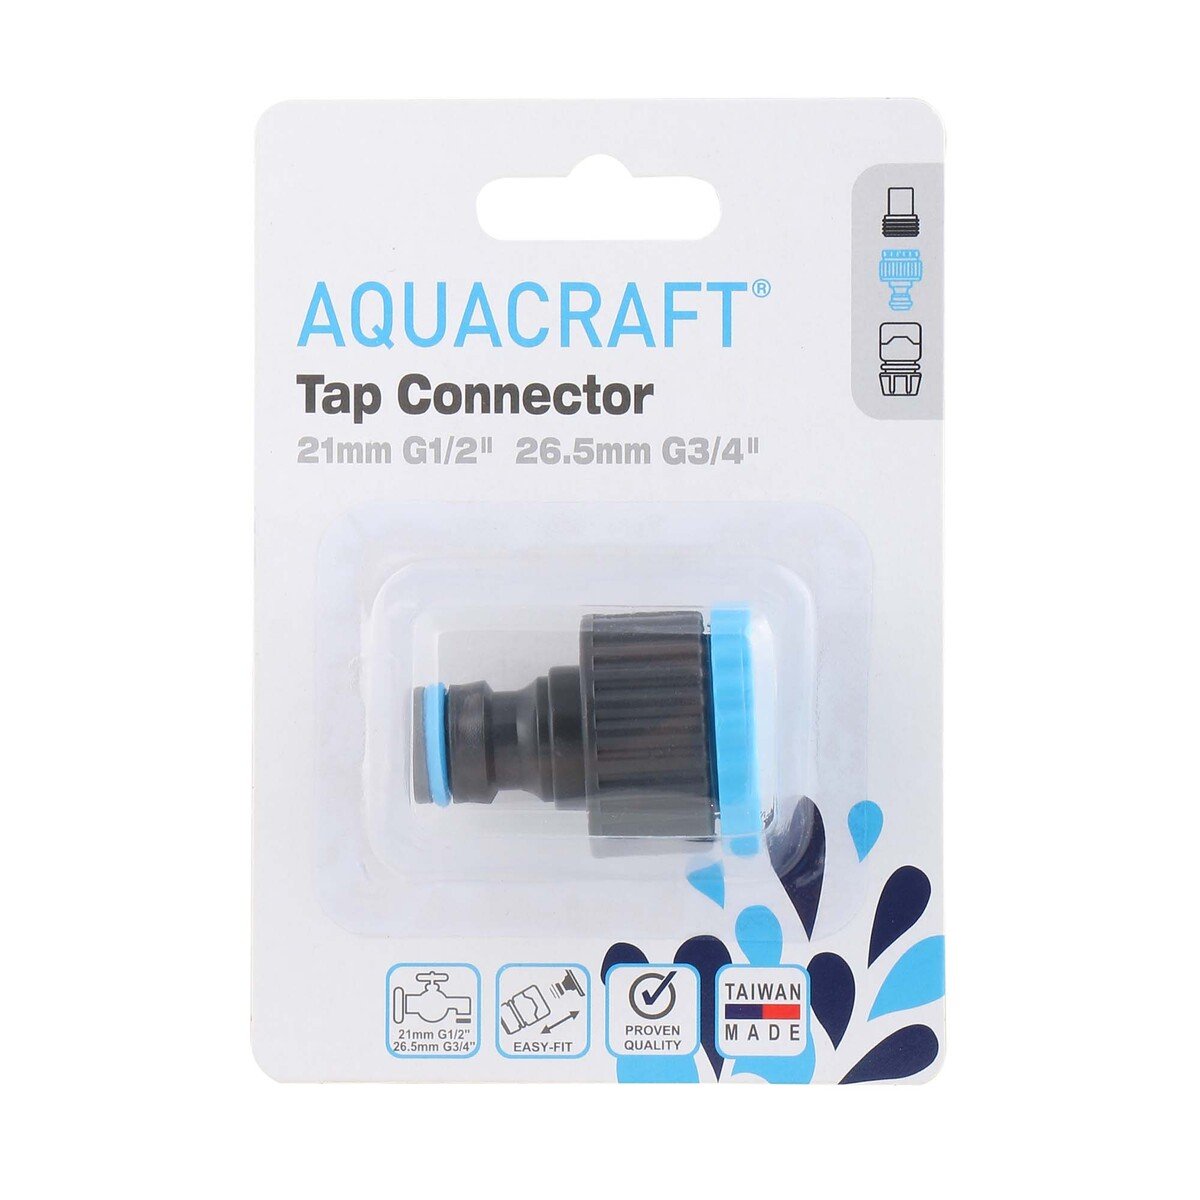 Aquacraft Standard Tap Connector, 3/4-1/2 inches, Blue, 550180